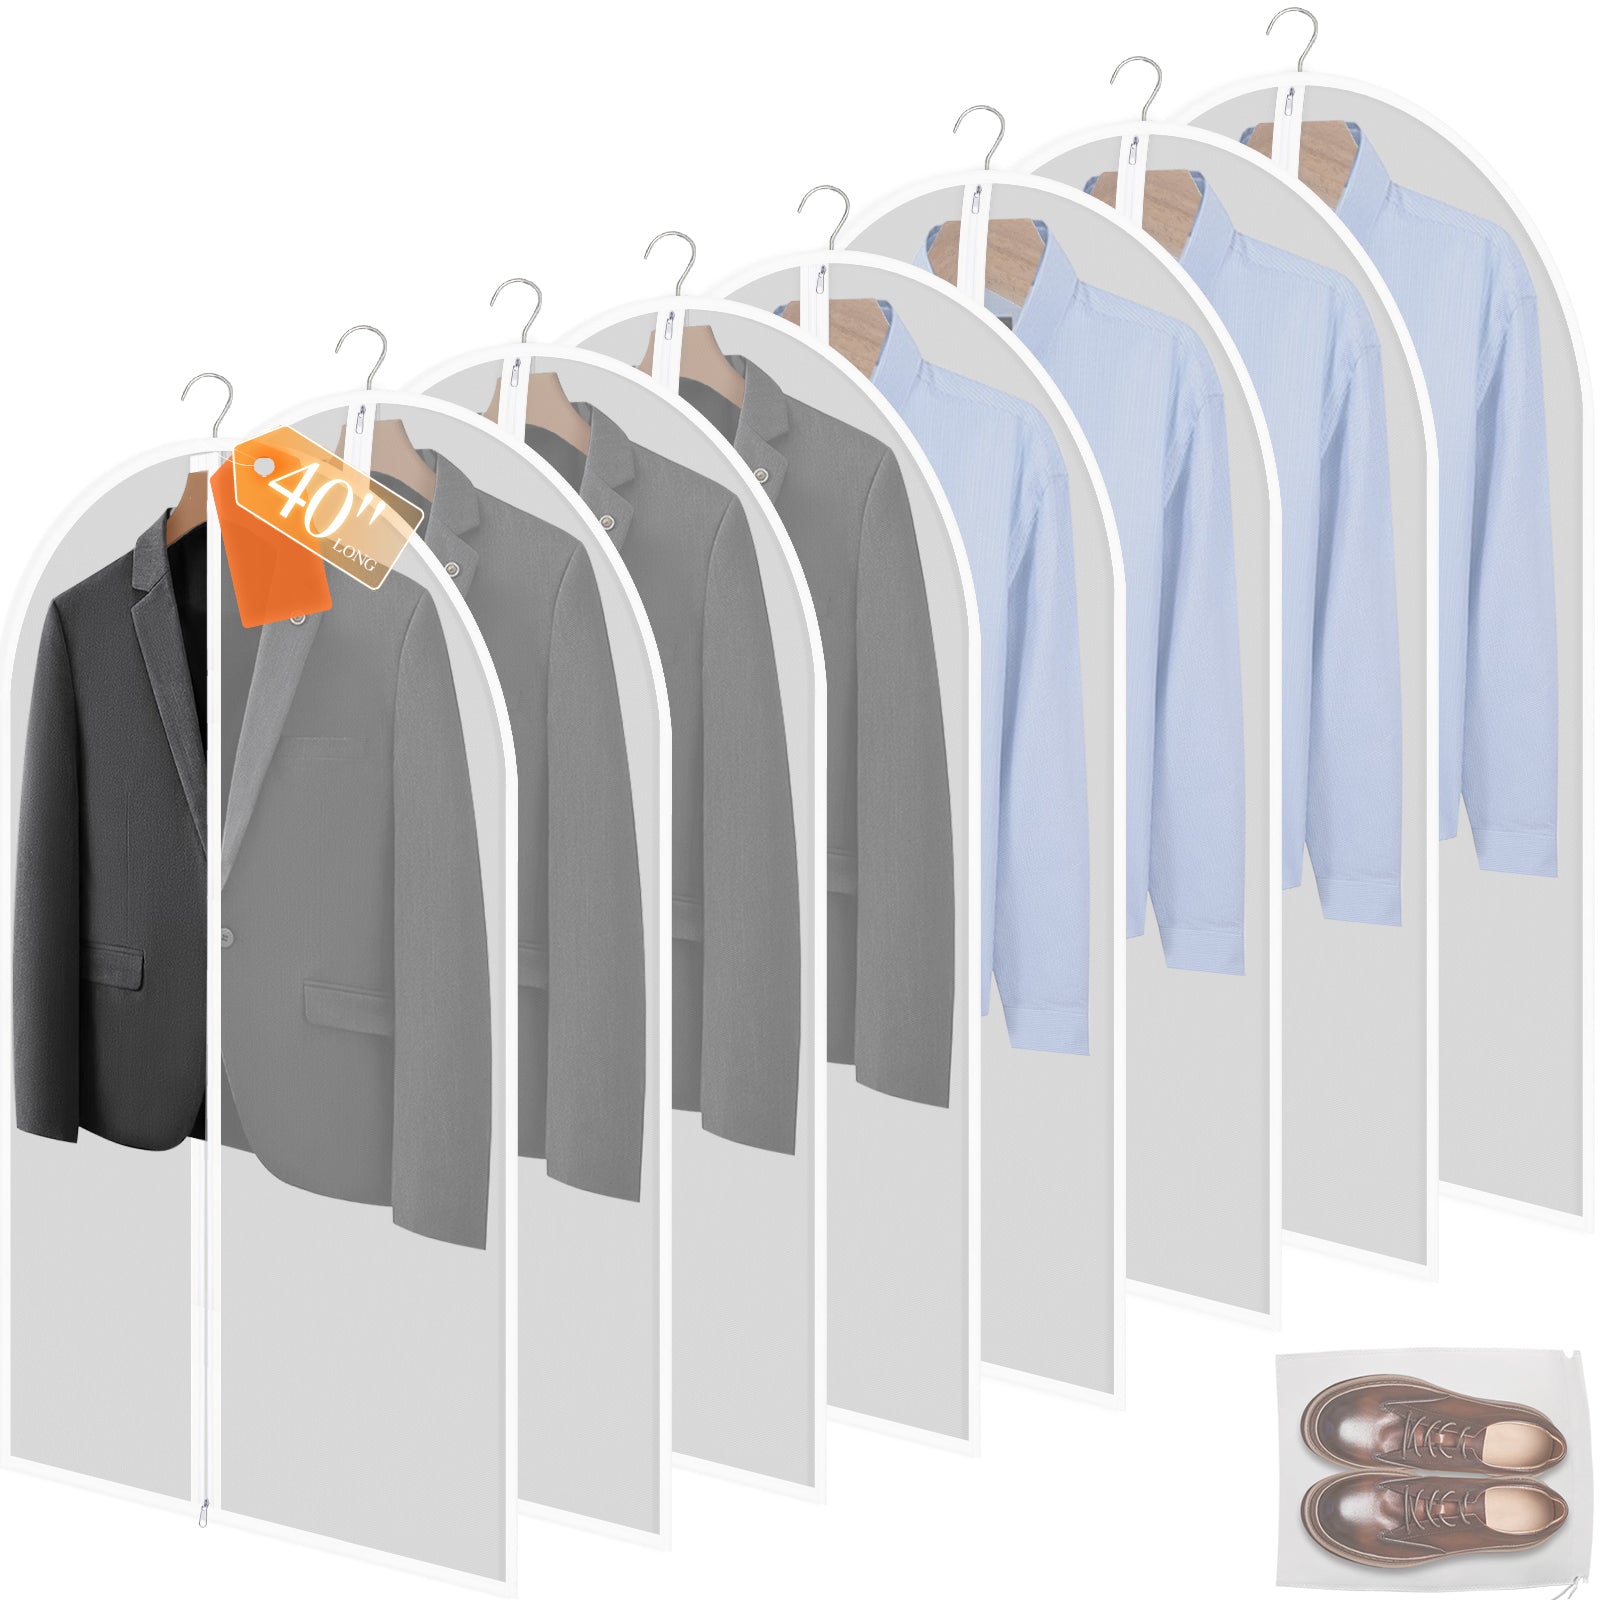 HOTOR Garment Bags - 40'' Garment Bags for Storage, 8-Pack Premium Garment Bags for Hanging Clothes, Dust-Proof Clothes Organizer for Shirts, Coats, Pants, Dresses Storage, Waterproof Garment Covers